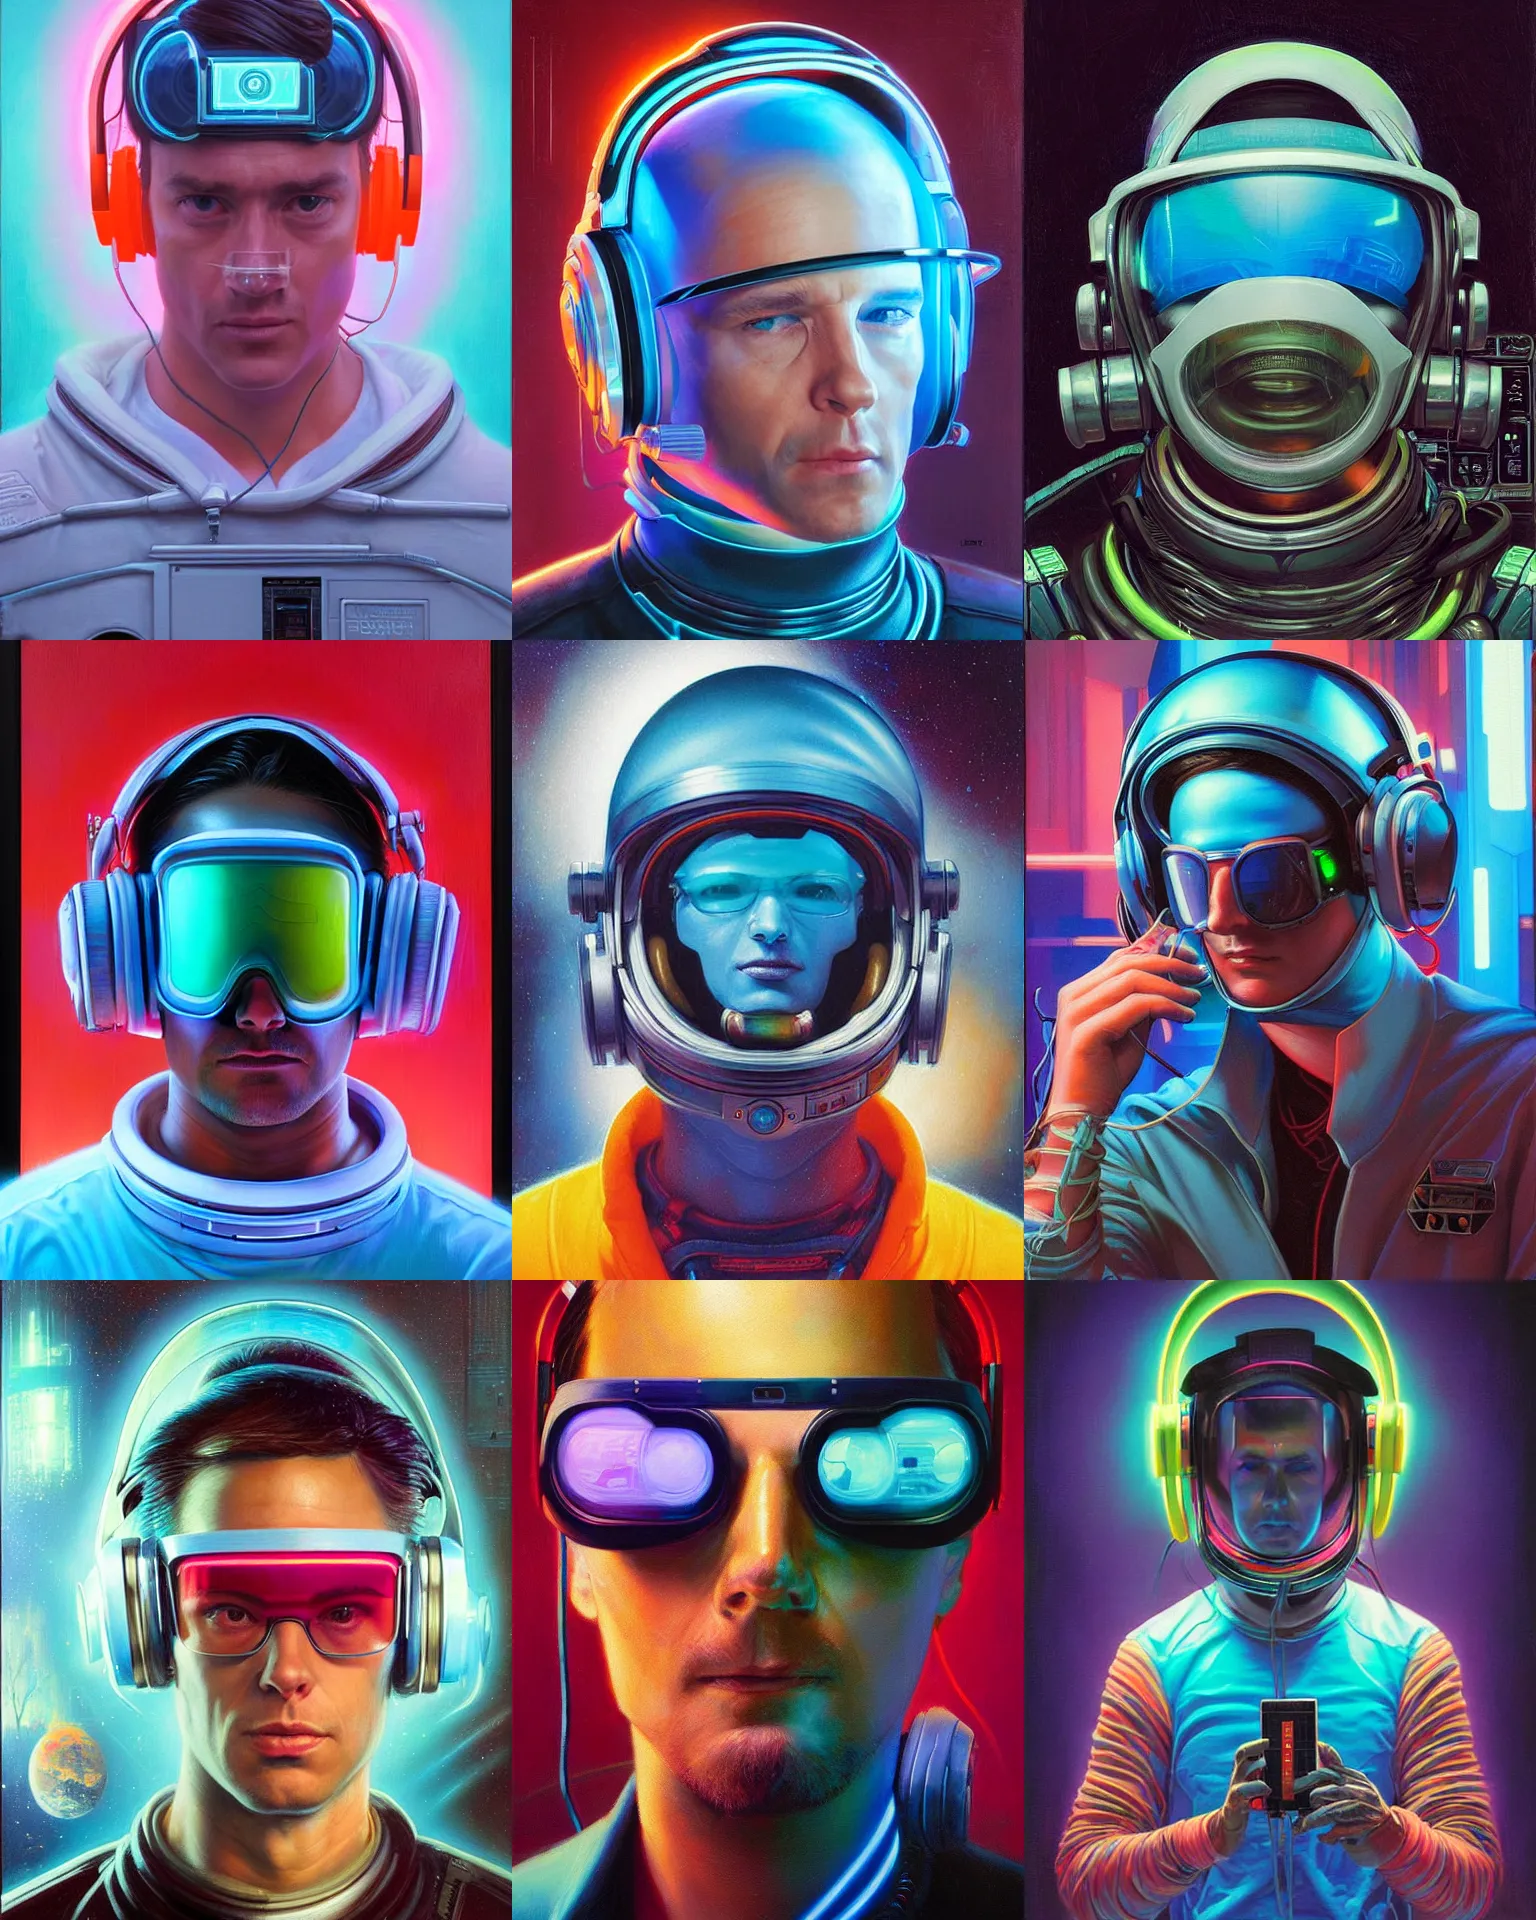 Prompt: neon cyberpunk programmer with thin cyan visor over eyes and sleek headphones headshot desaturated portrait painting by donato giancola, dean cornwall, rhads, tom whalen, alex grey astronaut fashion photography